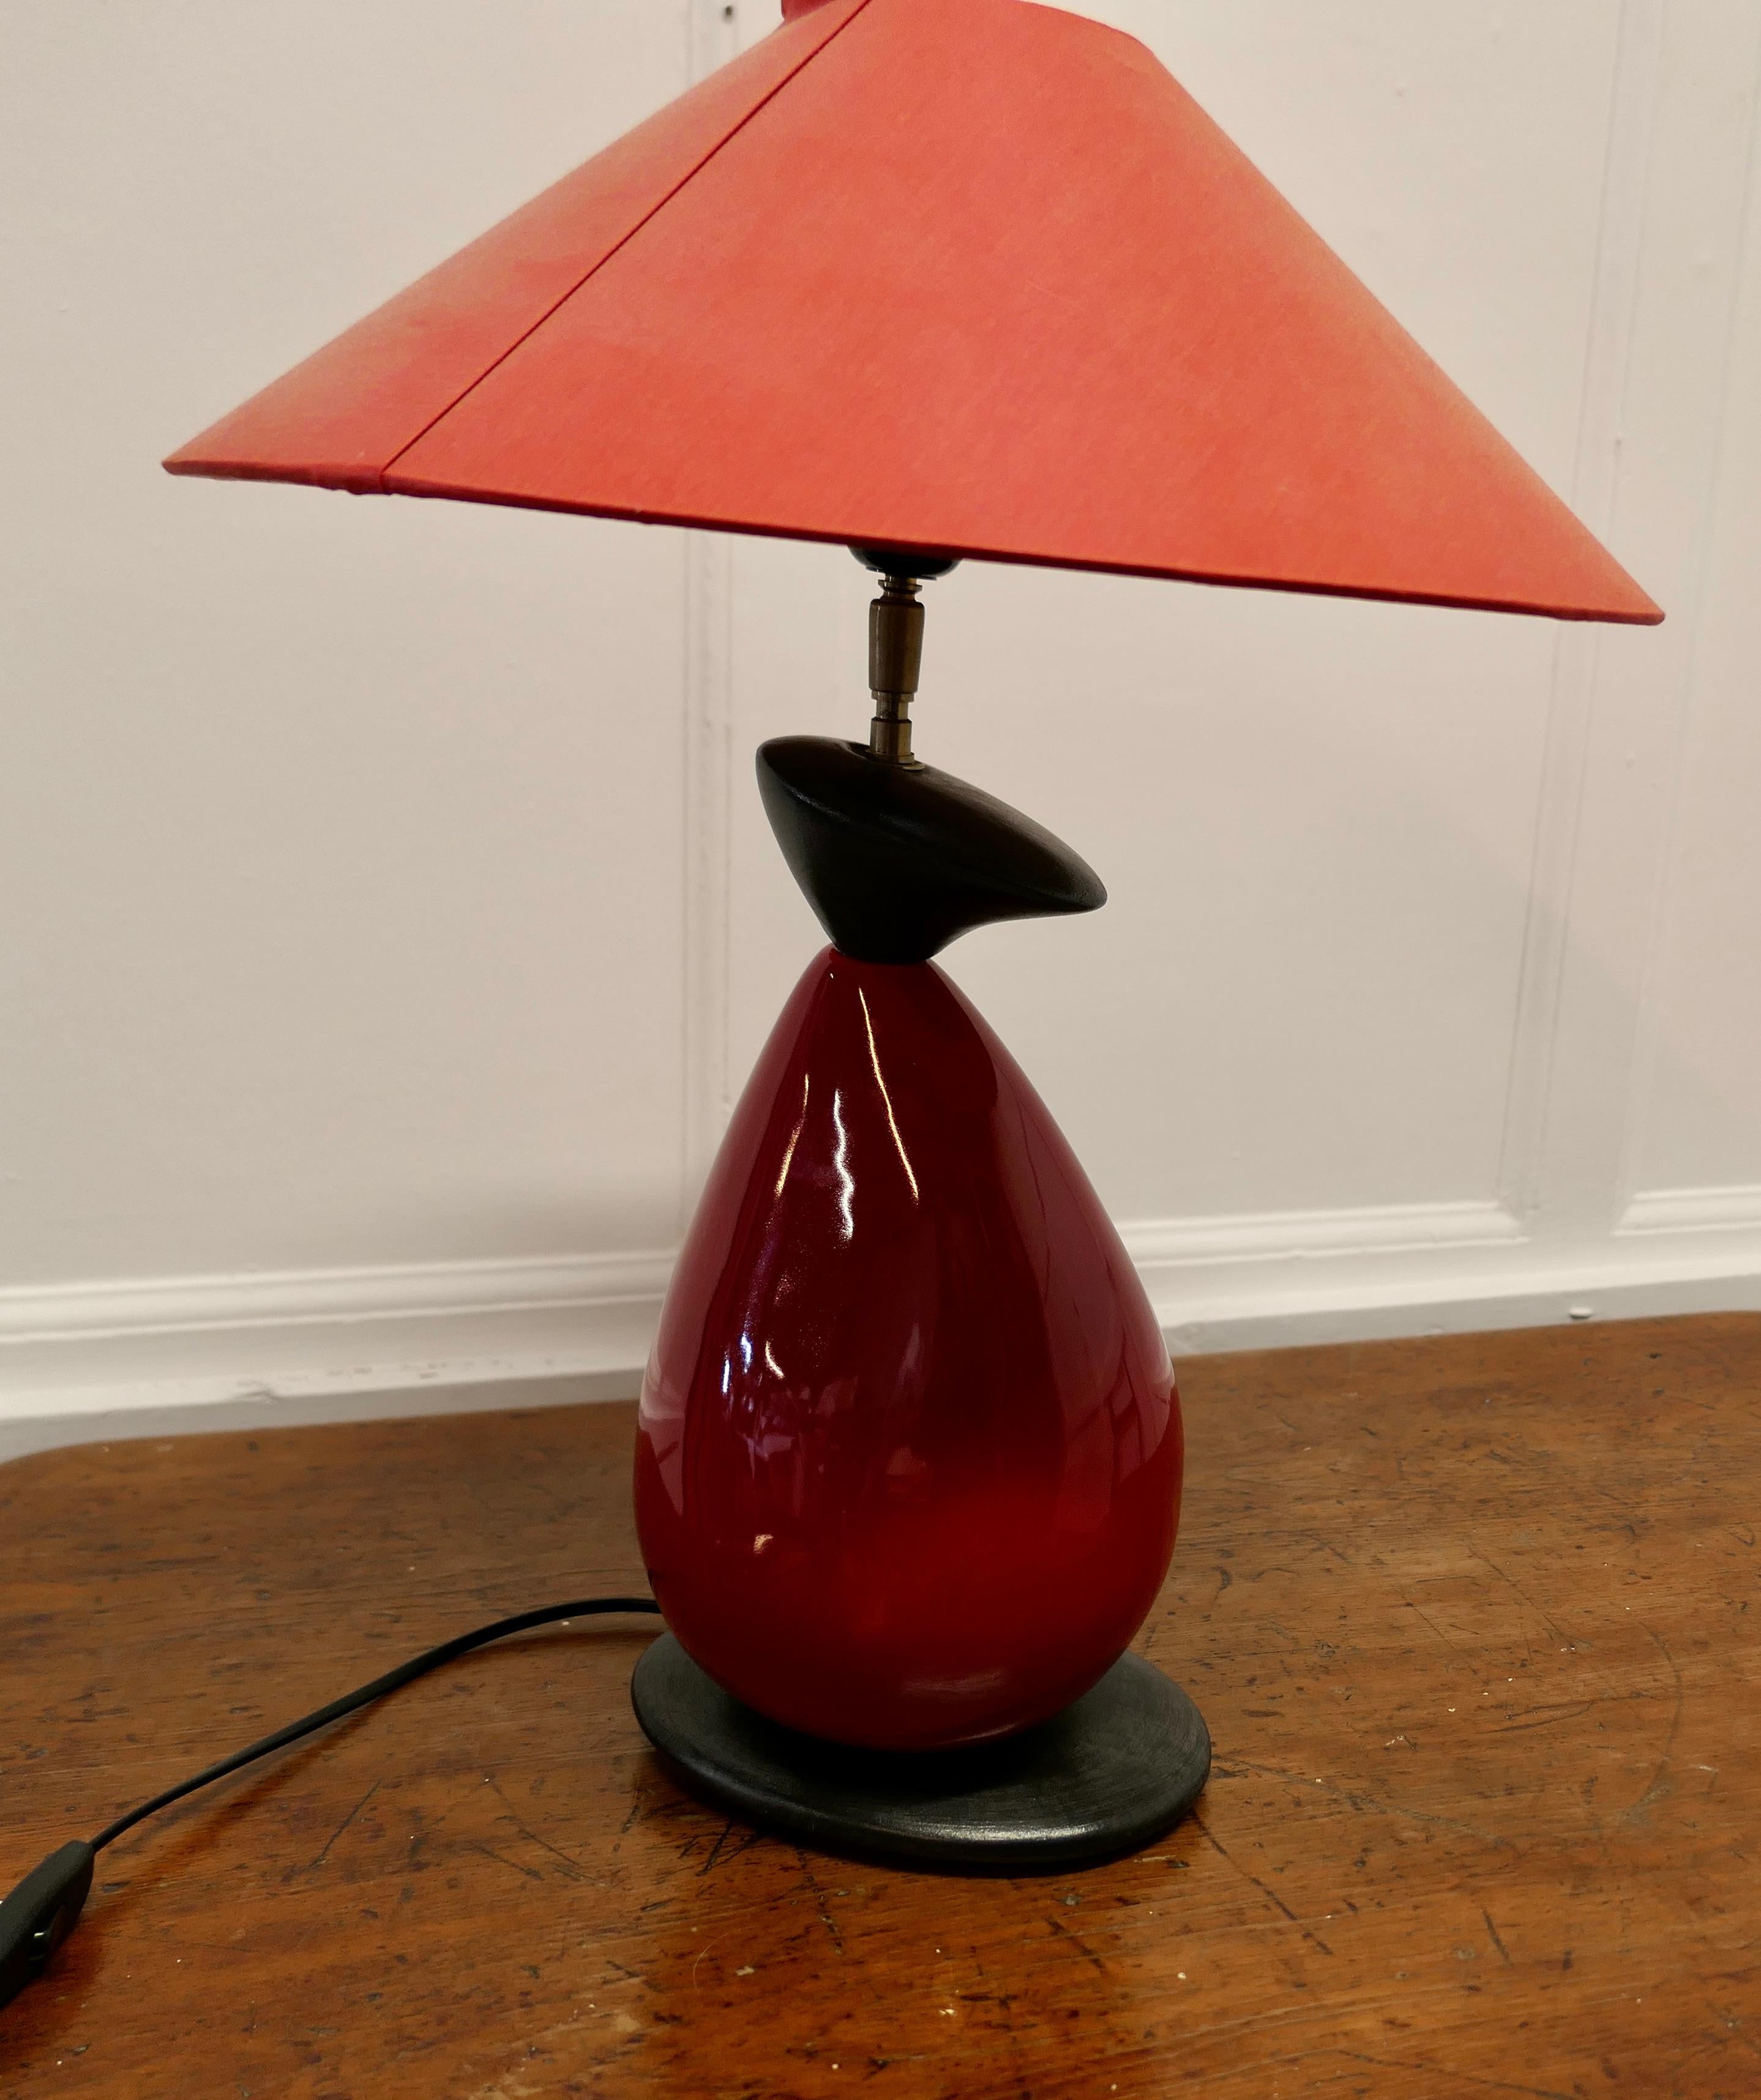 Francois Chatain Pebble Lamp from France a Charming Piece in Dark Red and Black In Good Condition For Sale In Chillerton, Isle of Wight